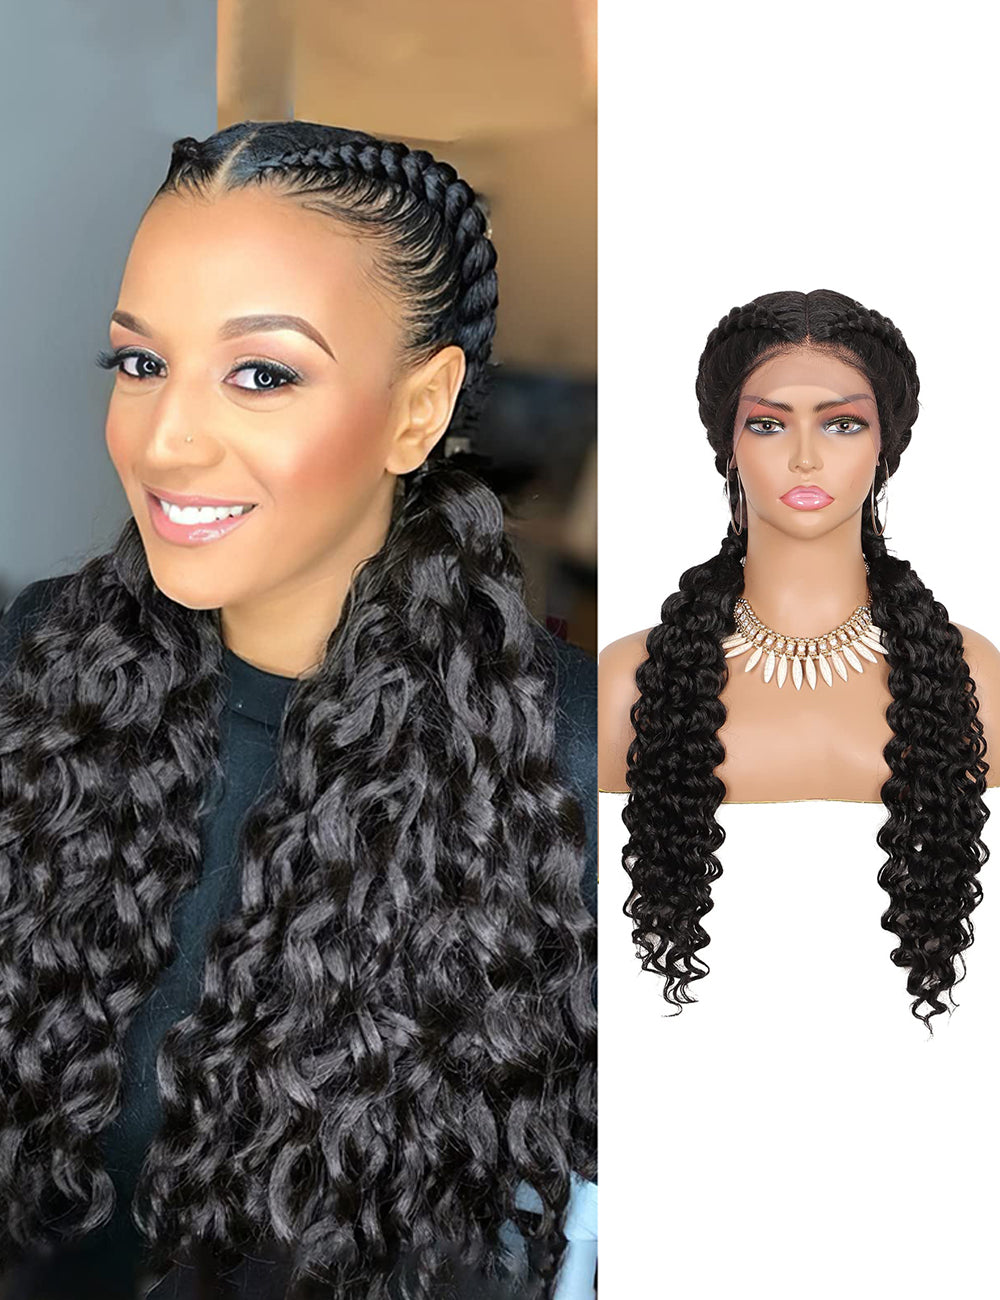 24 INCH Lace Front Curls Cornrow Braided Wigs